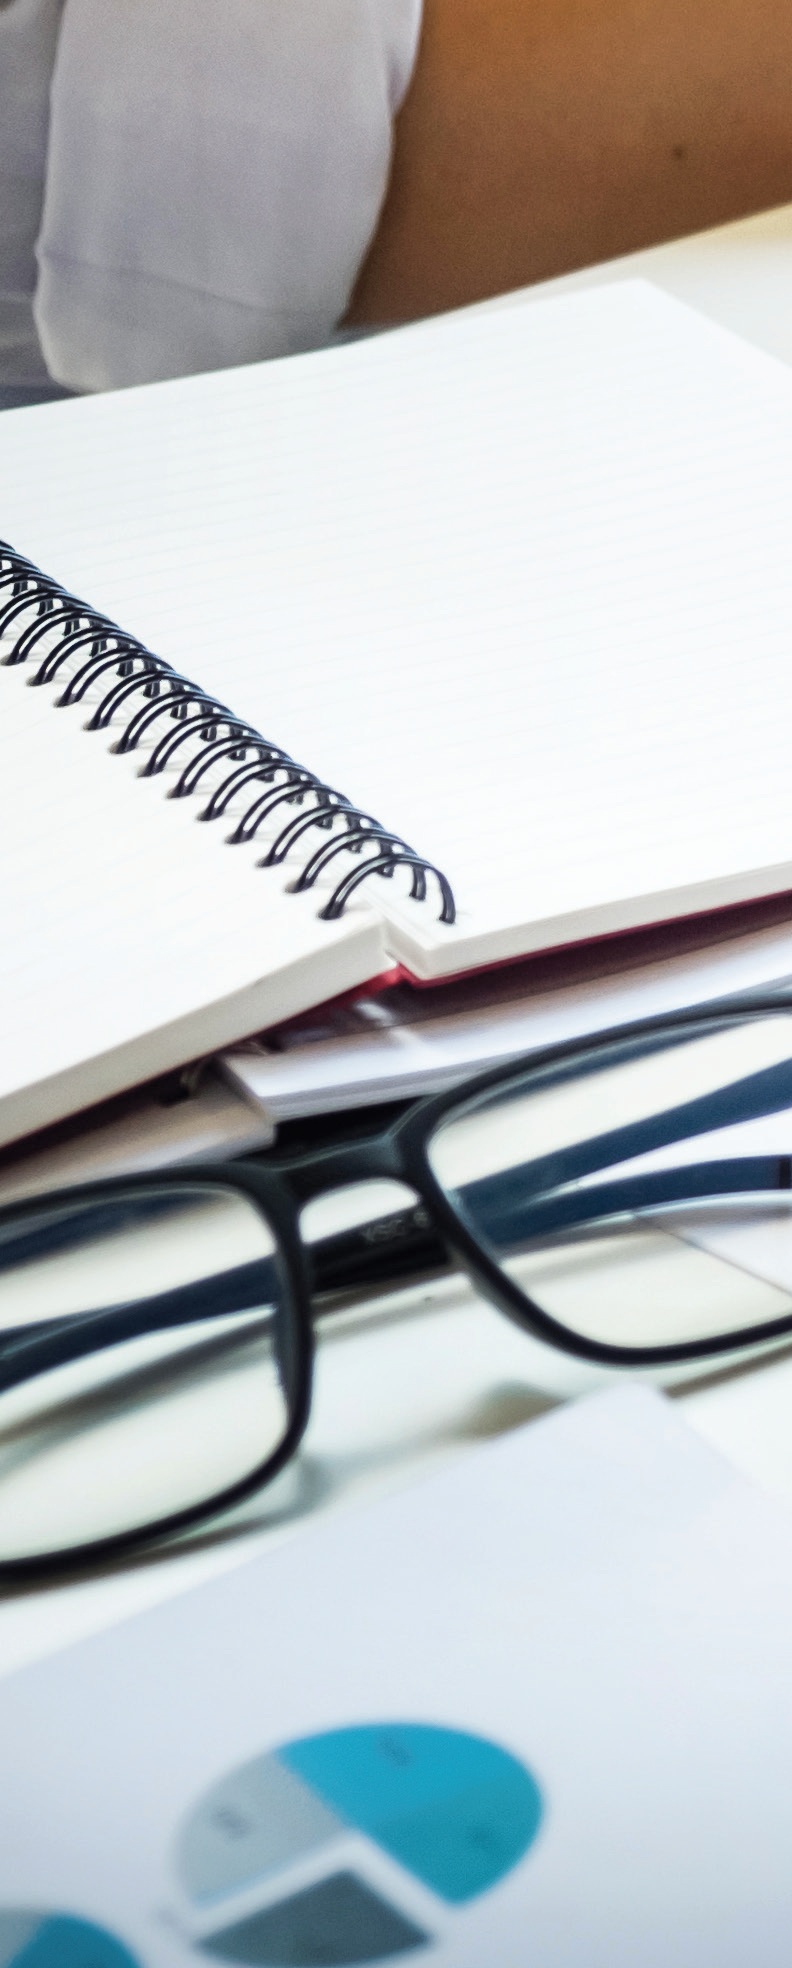 Decorative image of glasses in front of a notebook